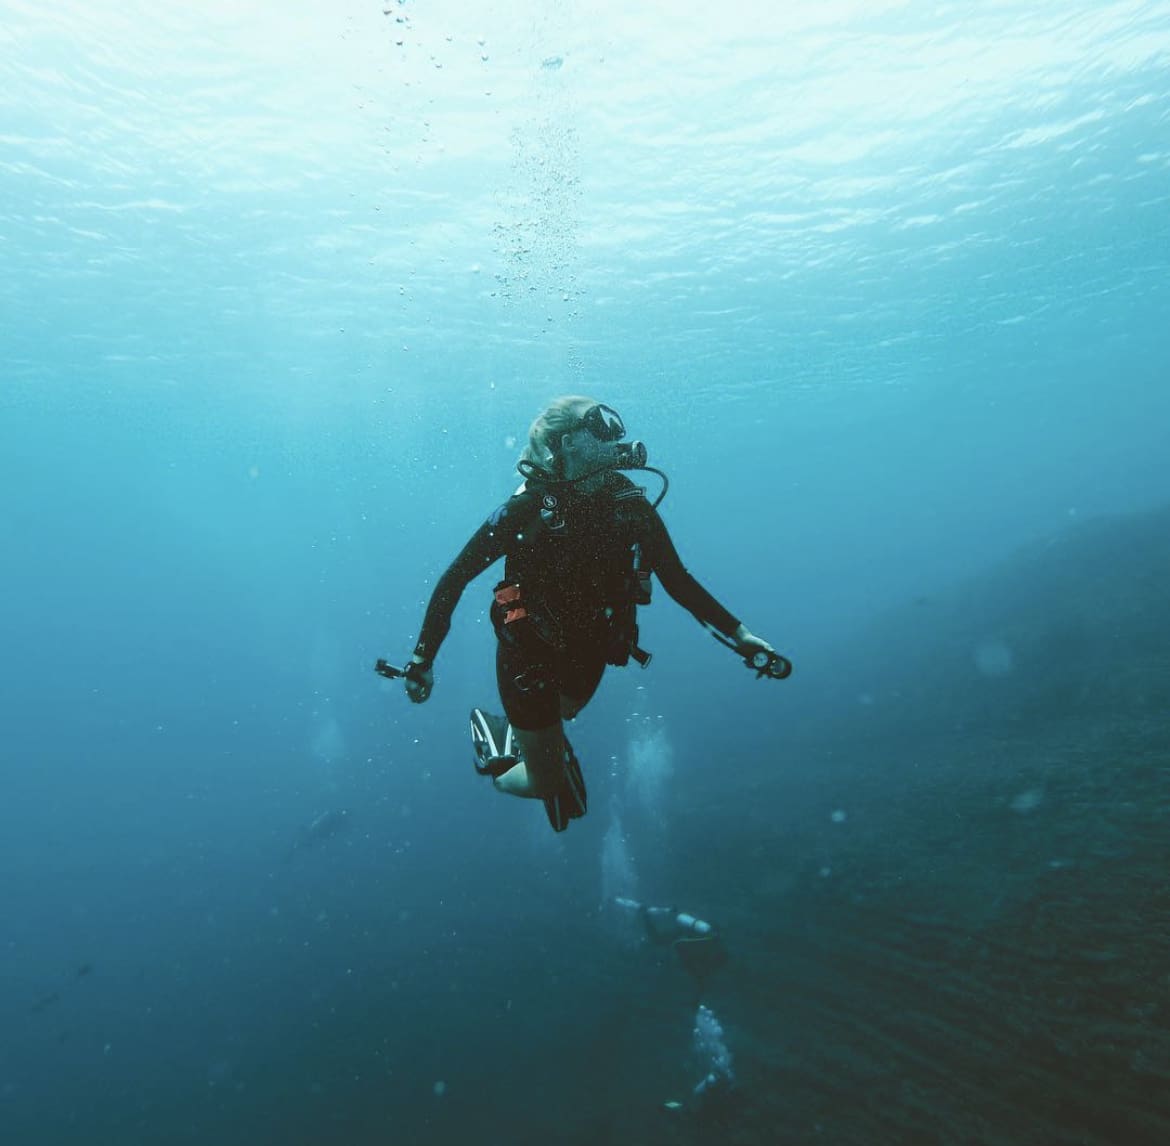 Scuba diving in the deep blue waters of Hawaii's North Shore